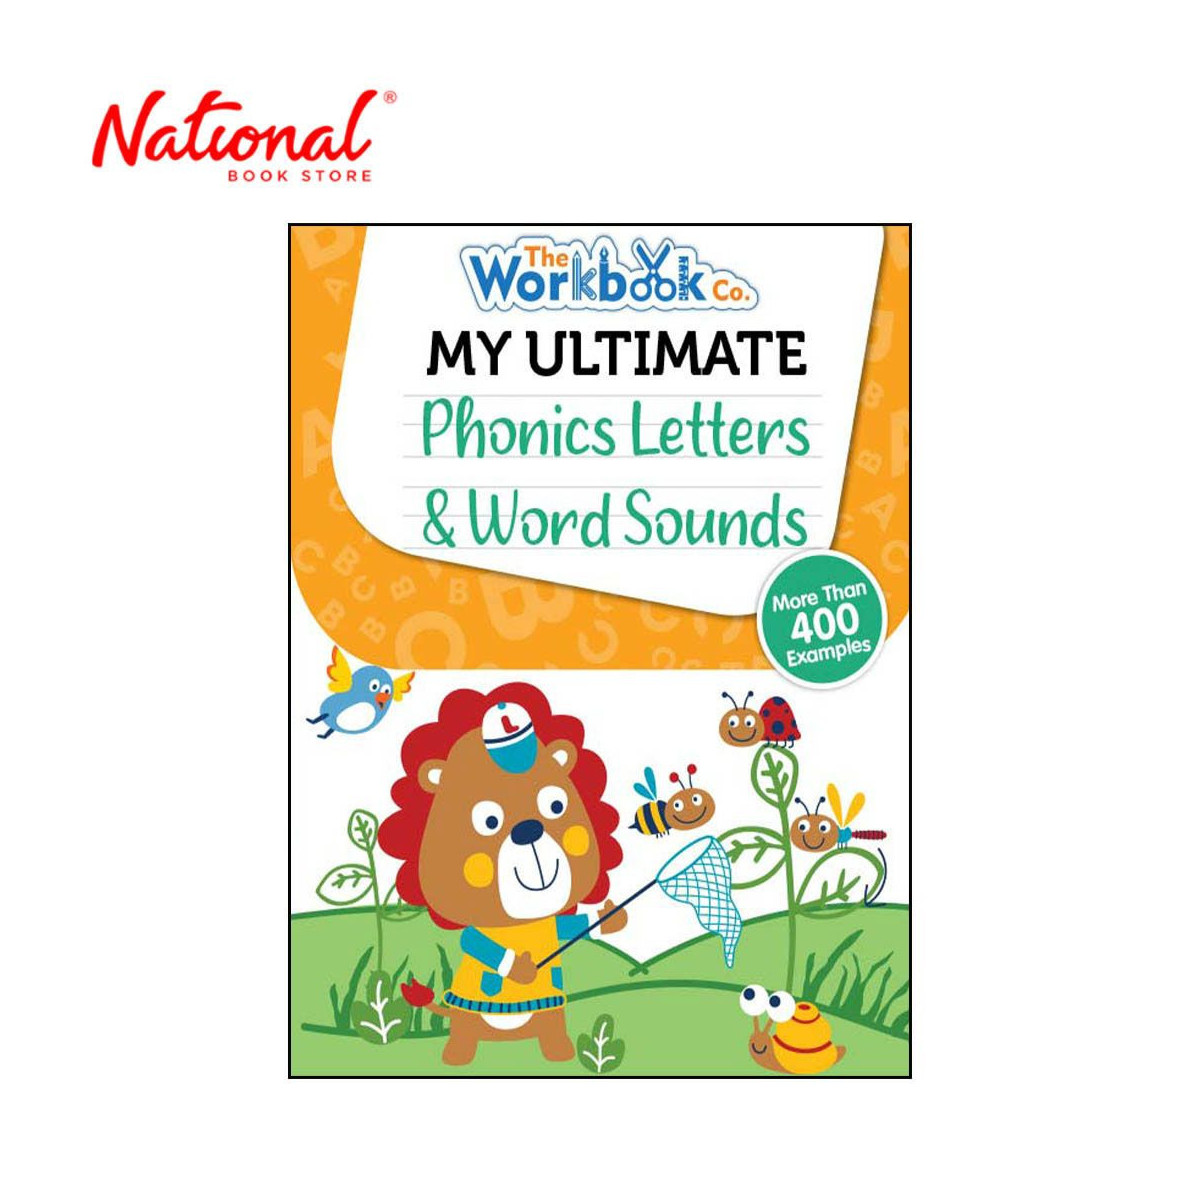 My Ultimate Phonics Letters & Word Sound - Trade Paperback